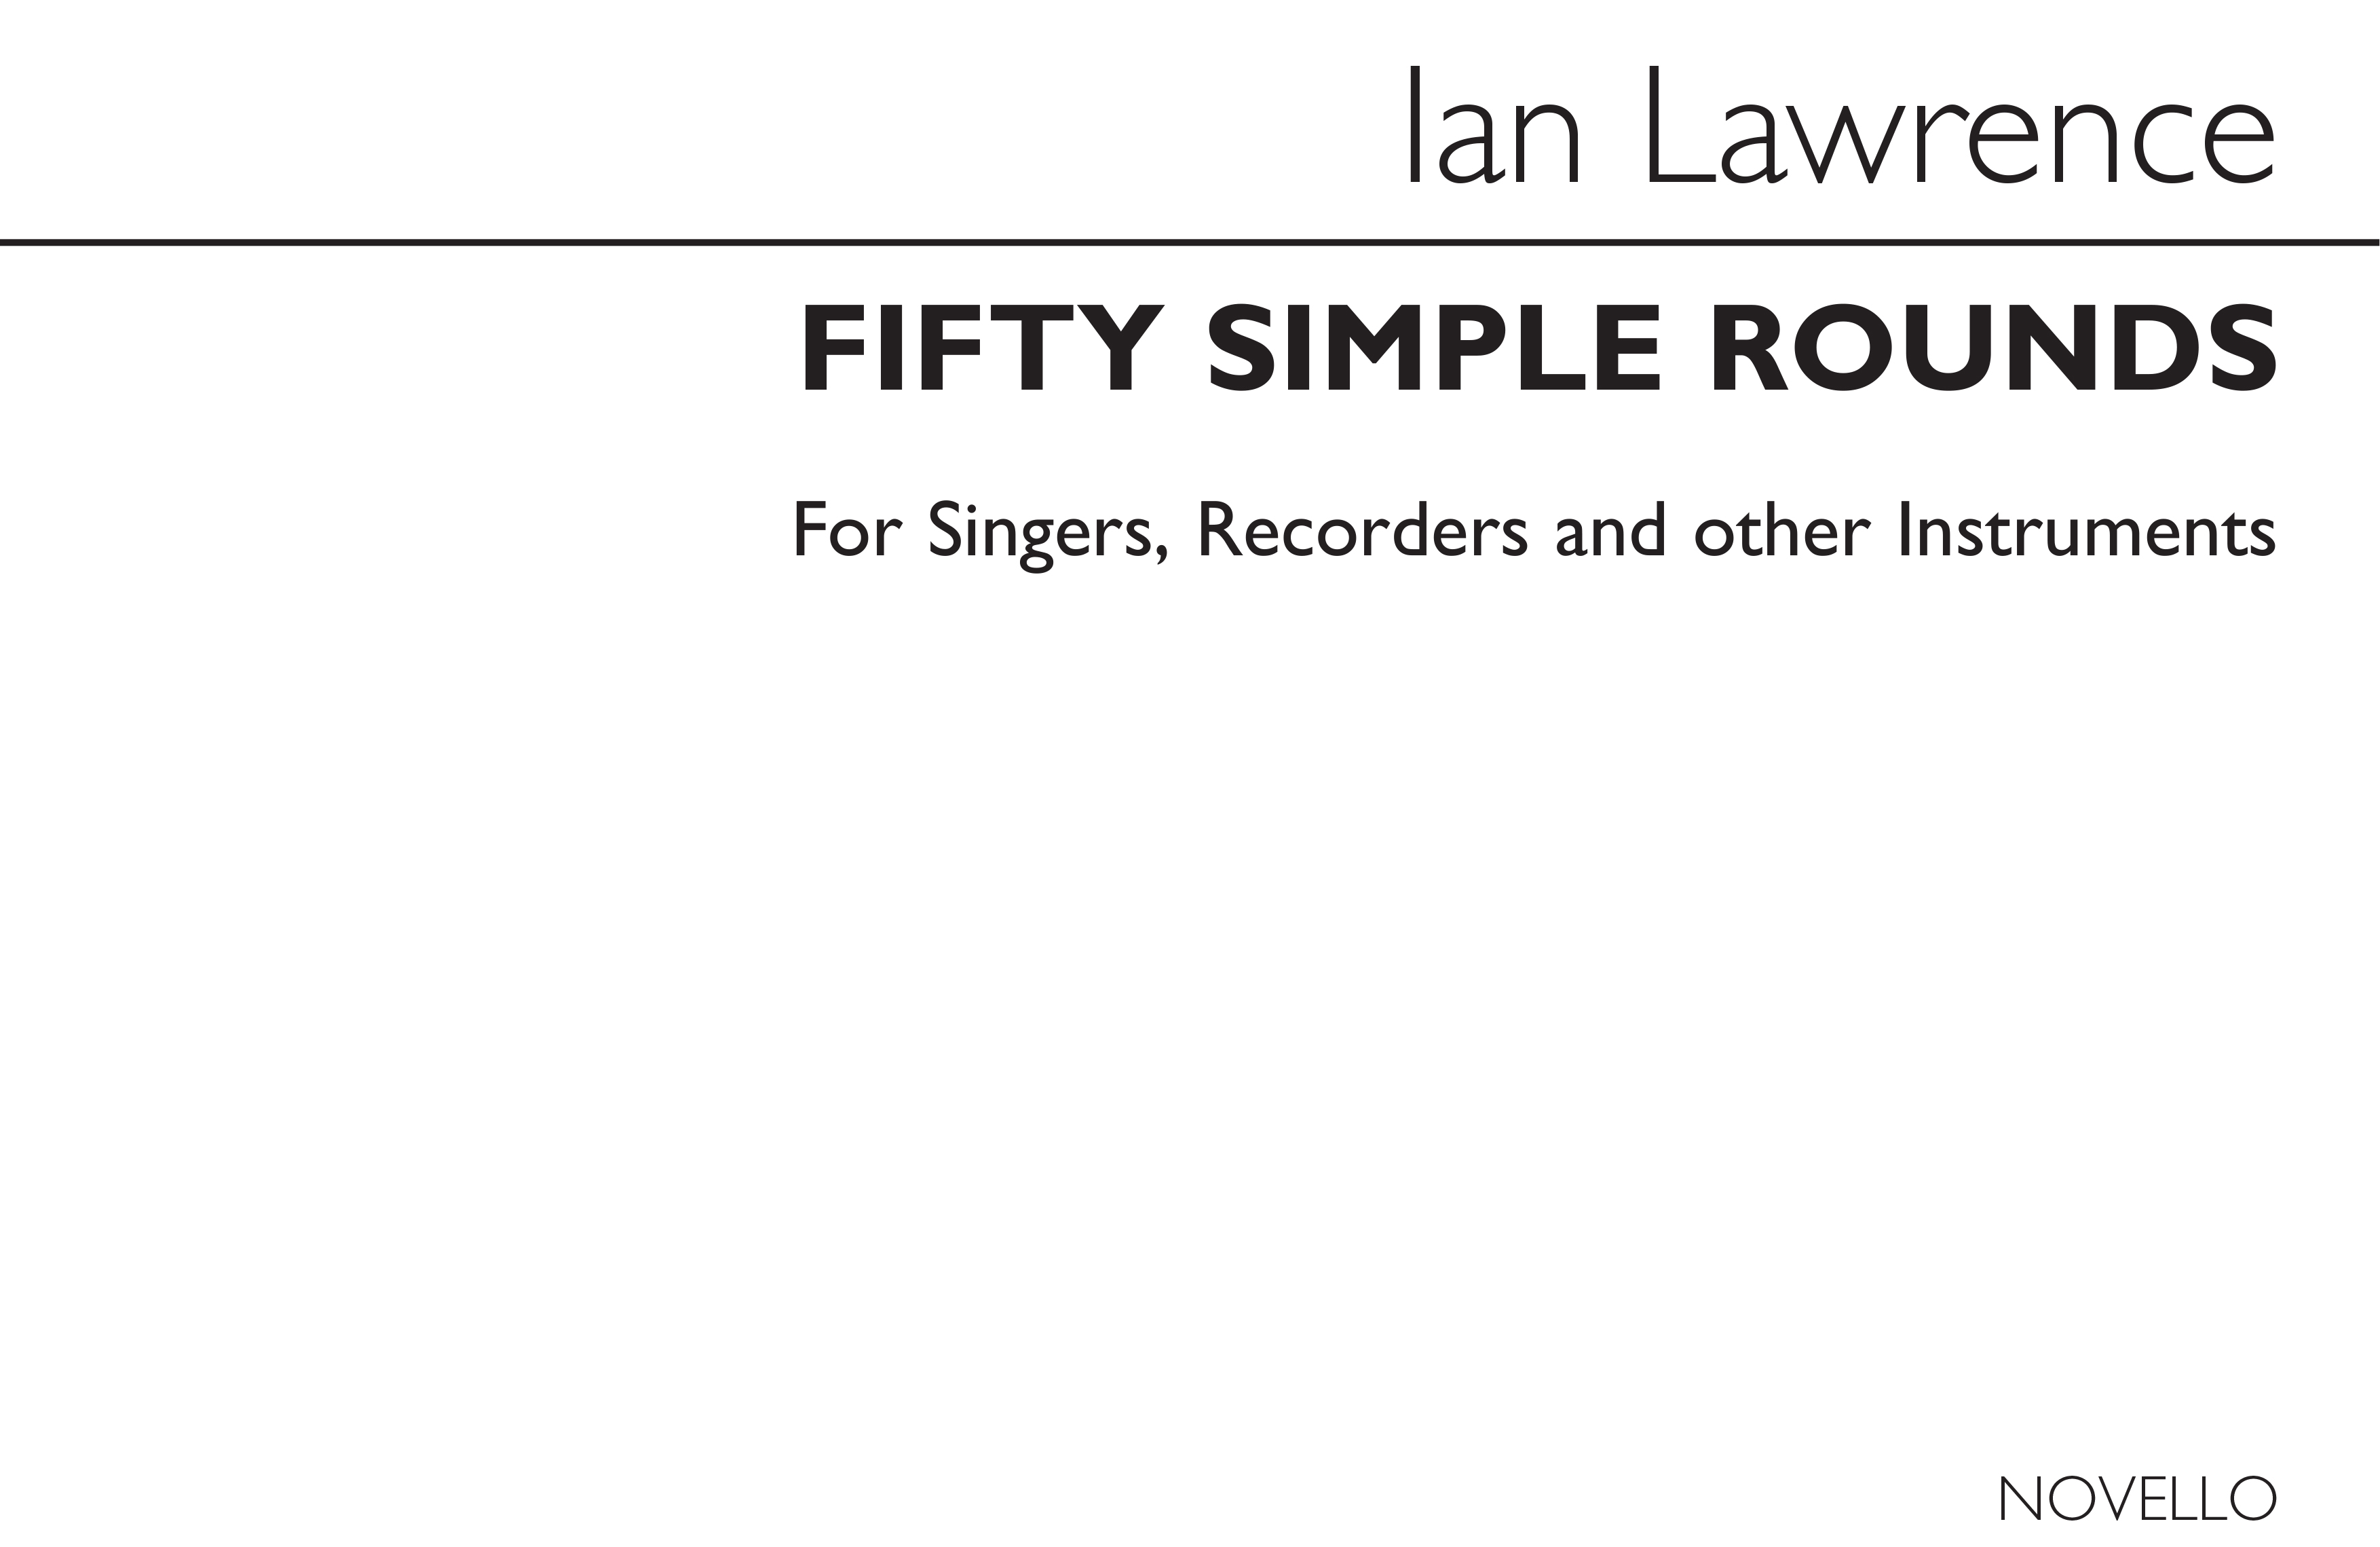 Ian Lawrence: 50 Simple Rounds for Voice and Recorder